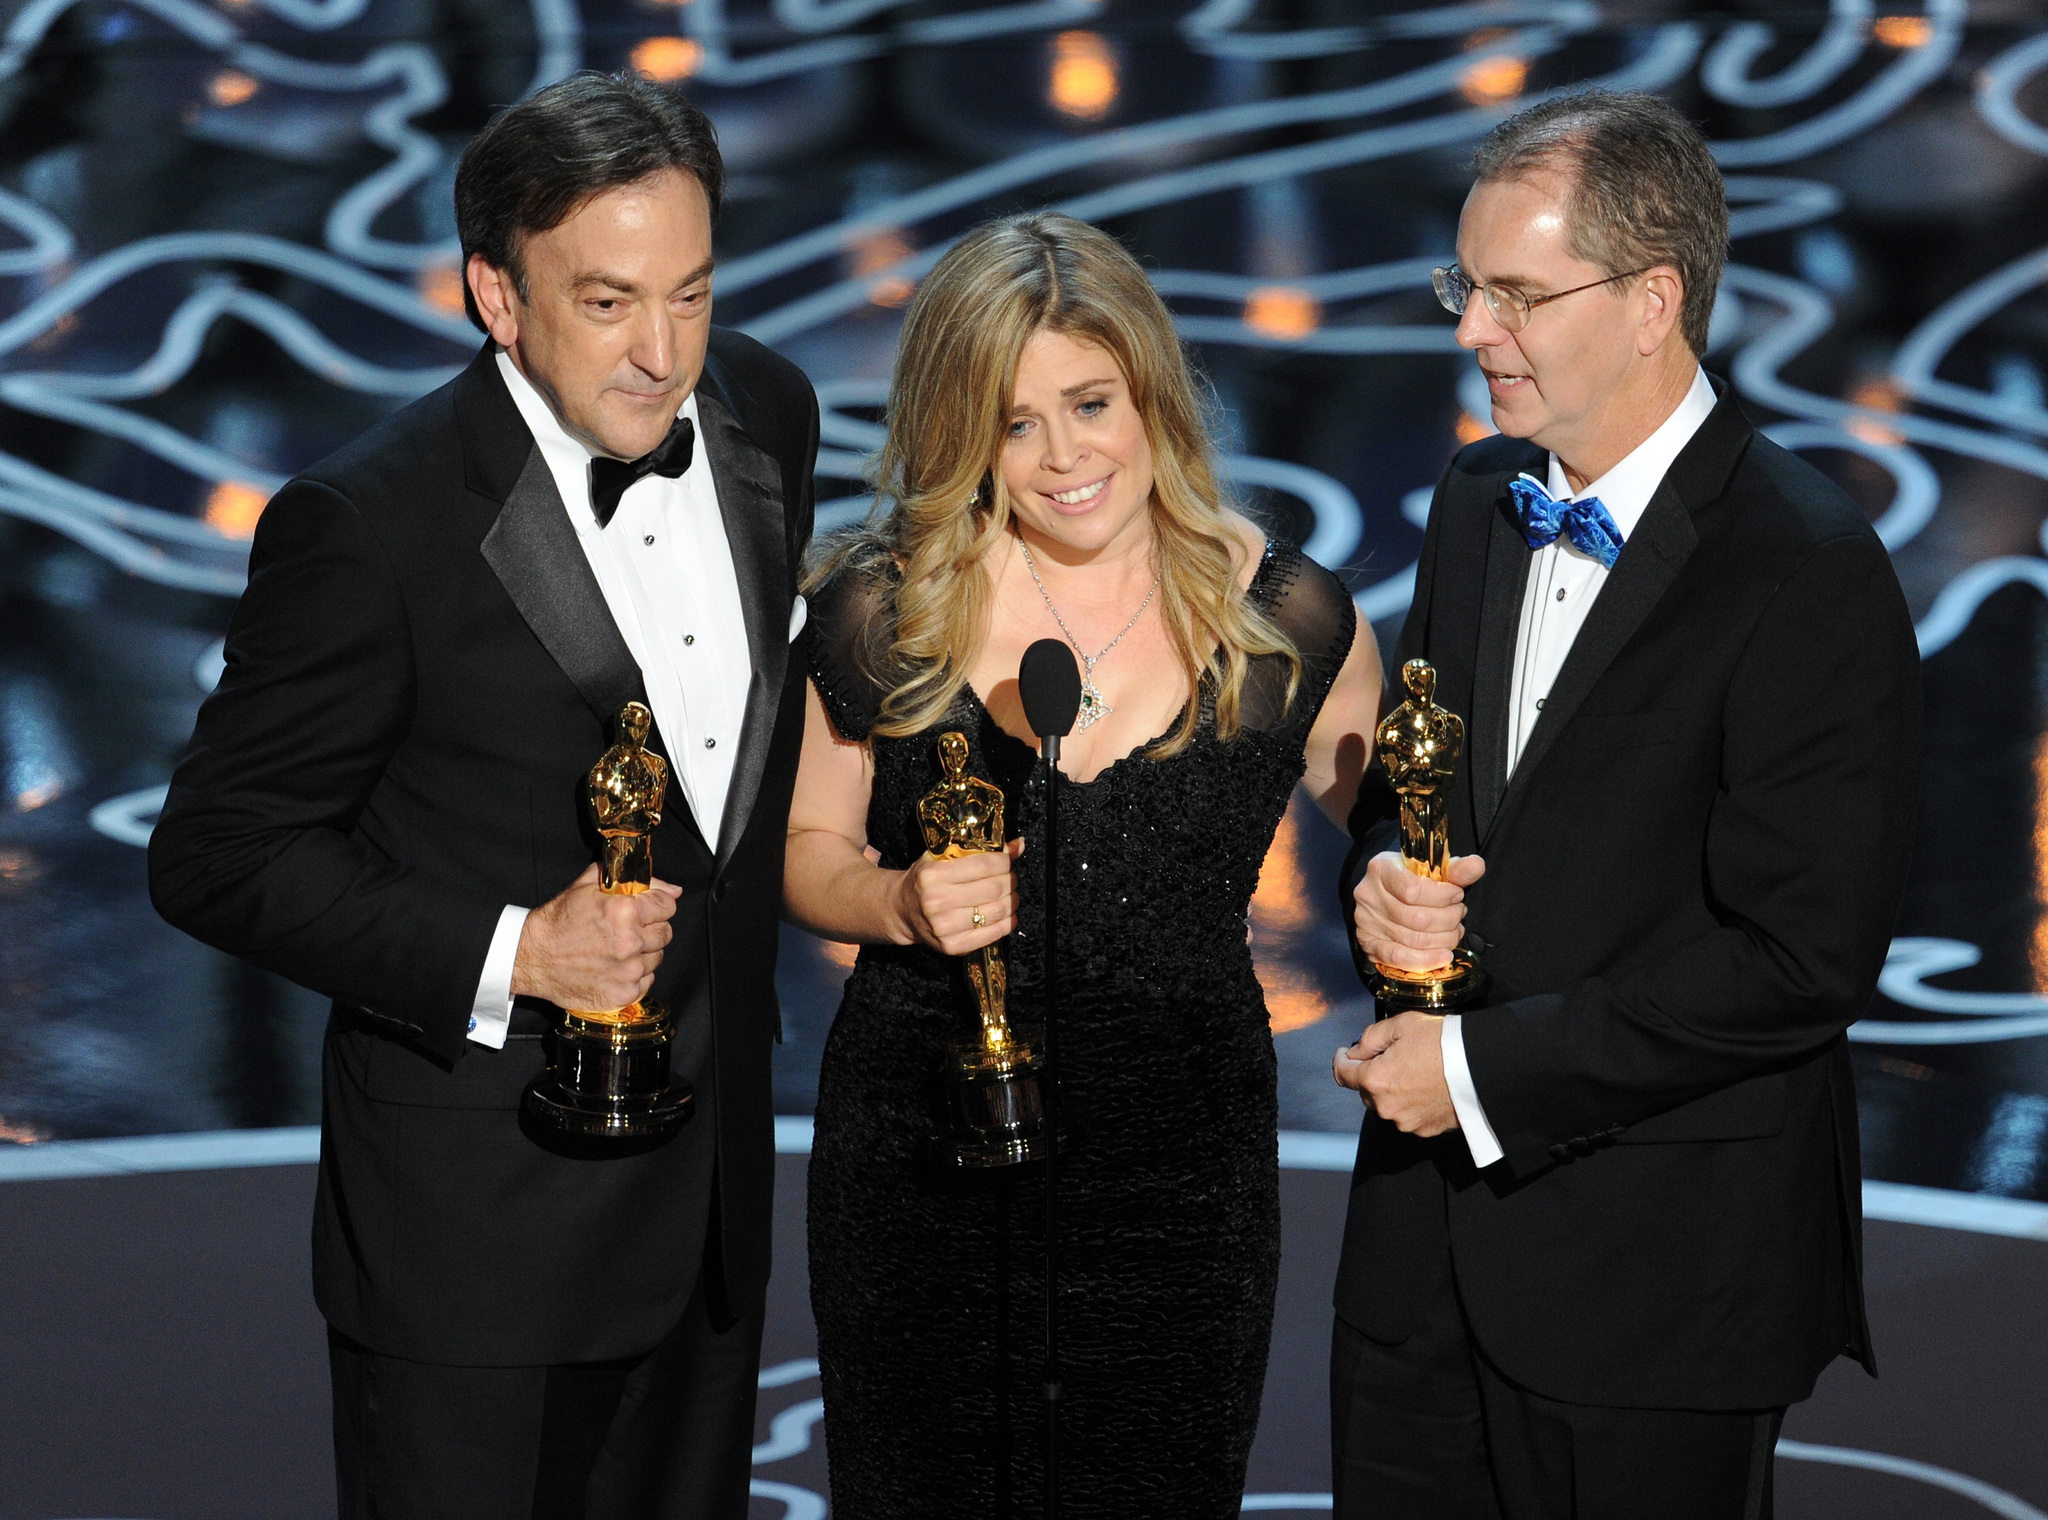 Chris Buck, Peter Del Vecho and Jennifer Lee at event of The Oscars (2014)